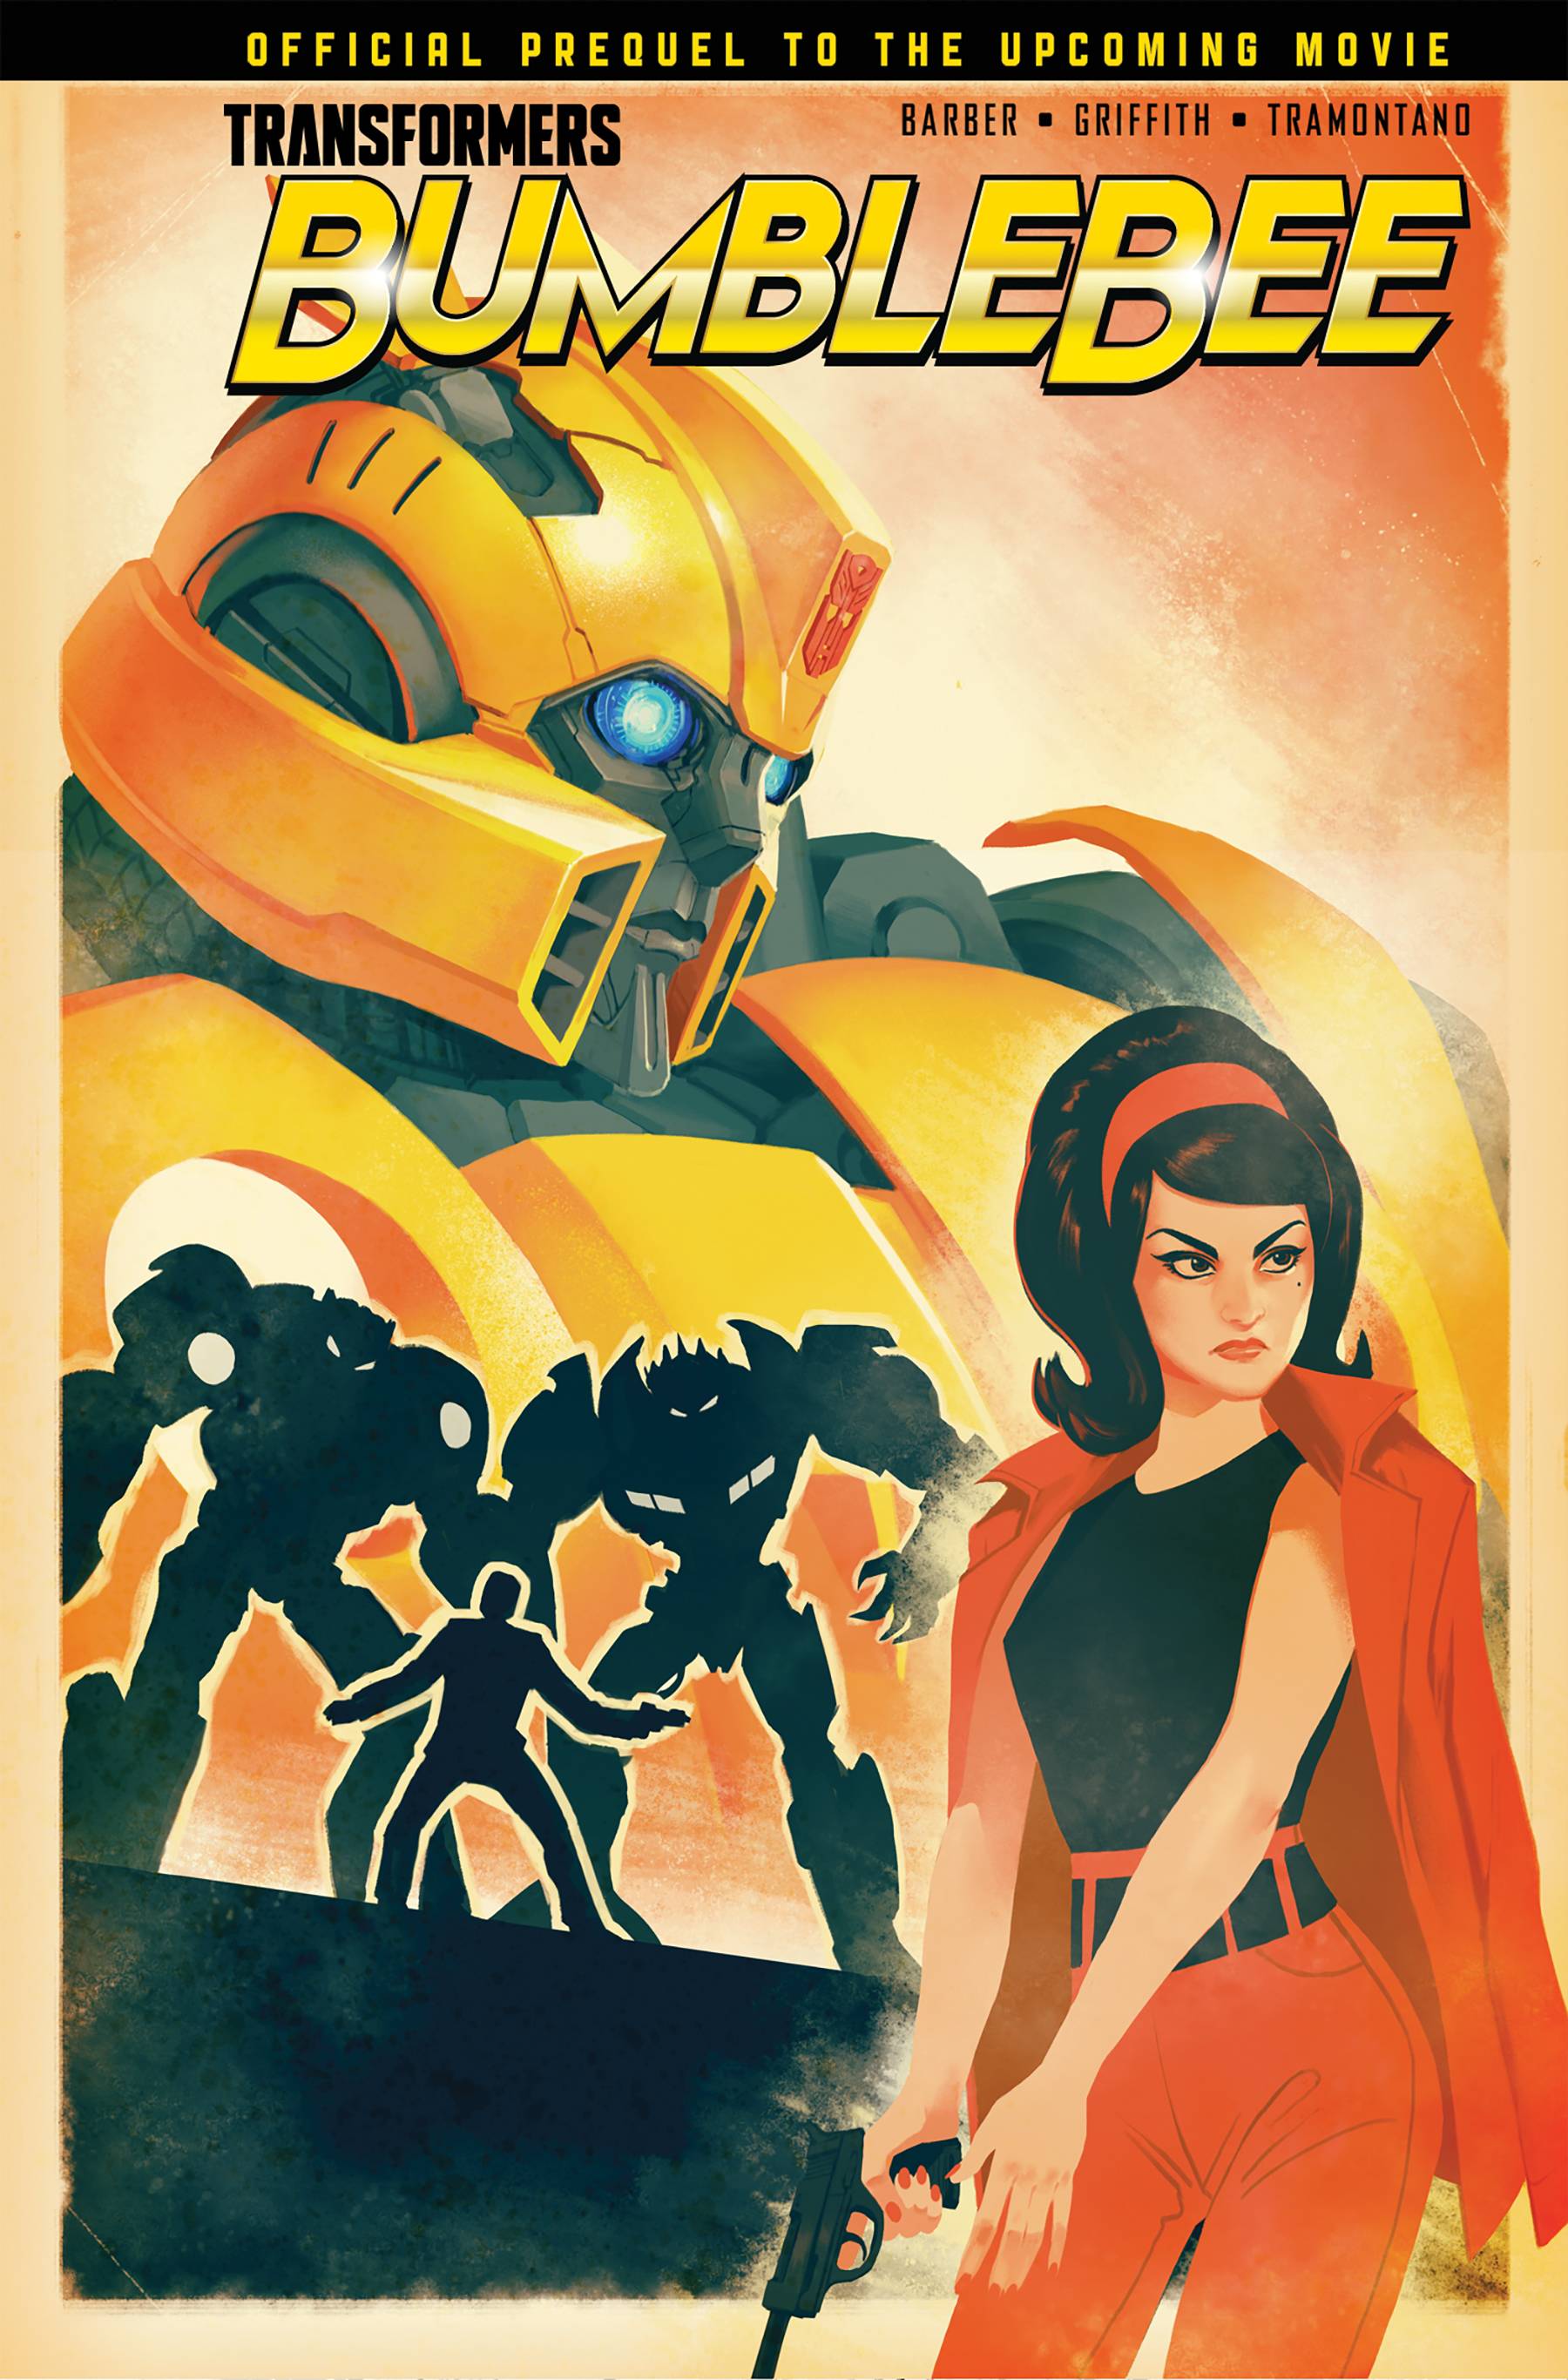 Transformers Bumblebee Movie Prequel Graphic Novel From Cybertron Love